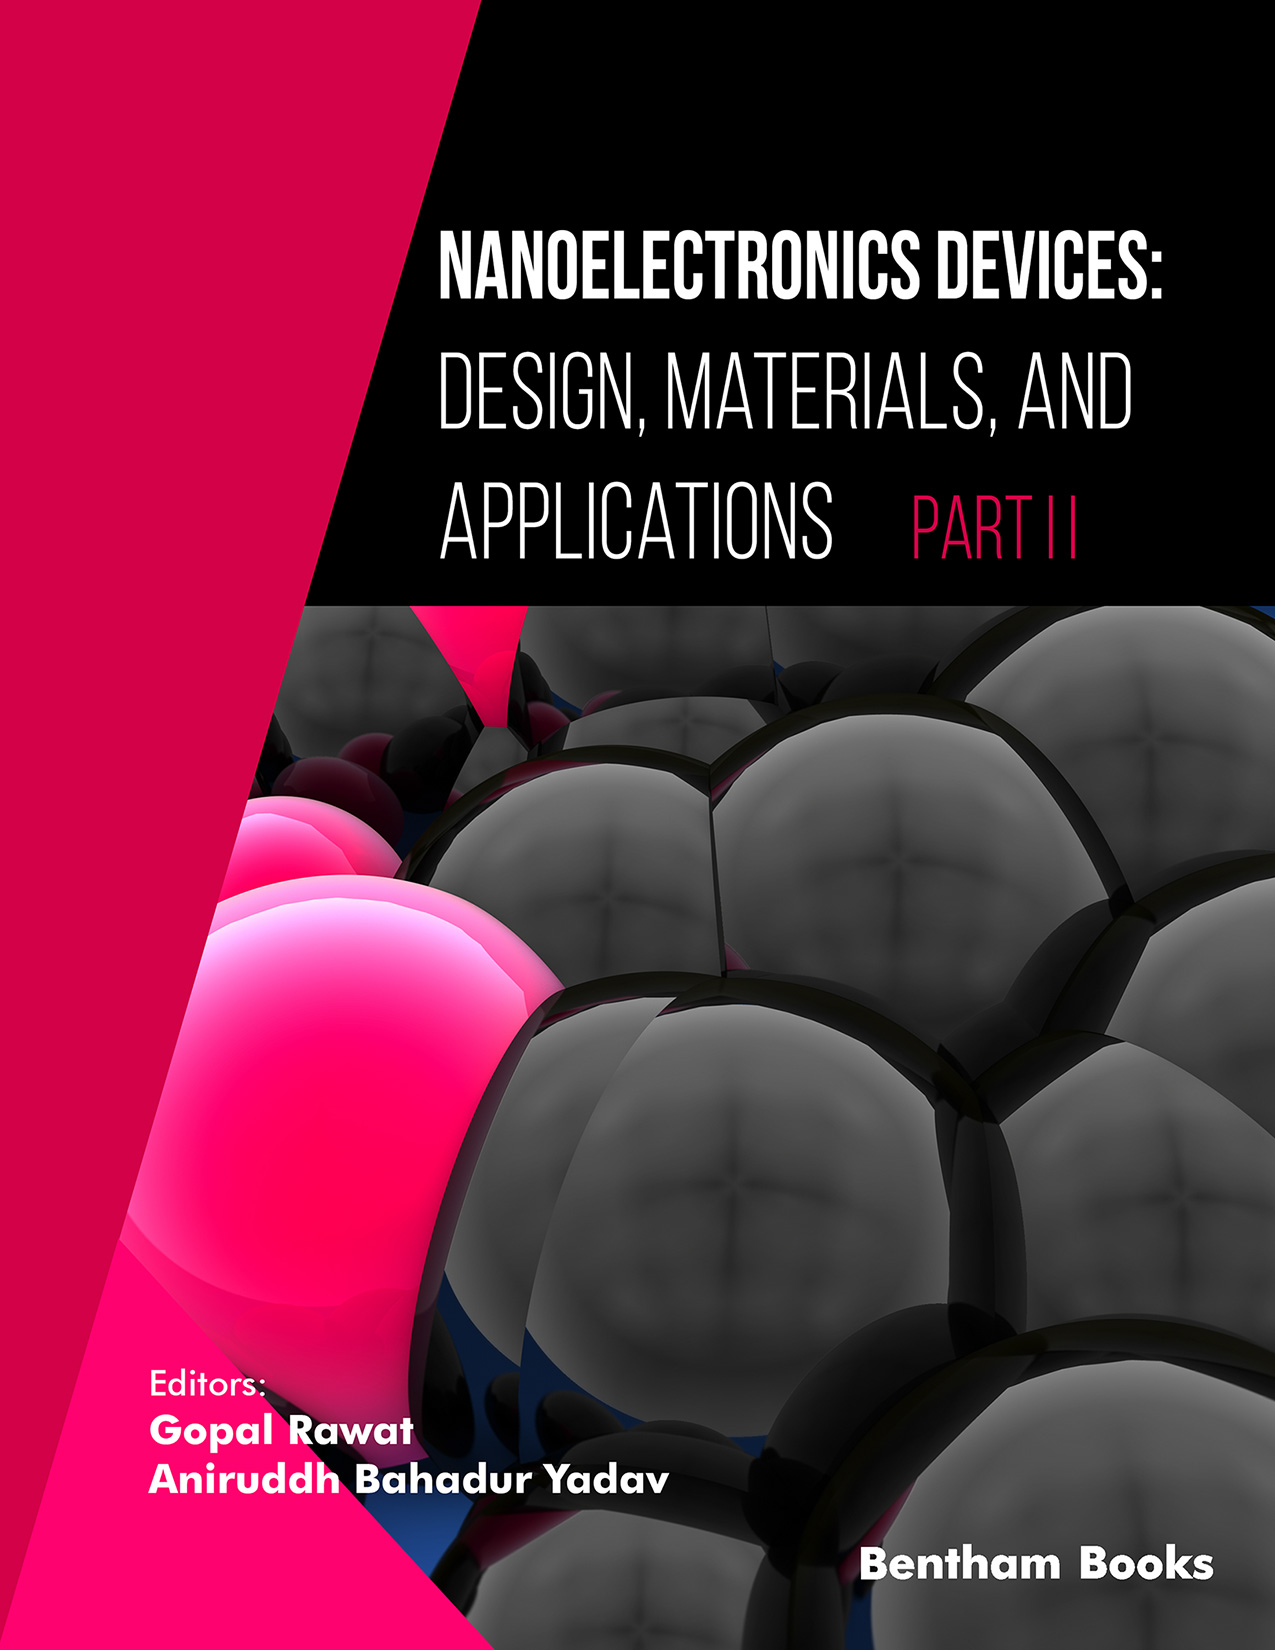 Nanoelectronics Devices: Design, Materials, and Applications Part II